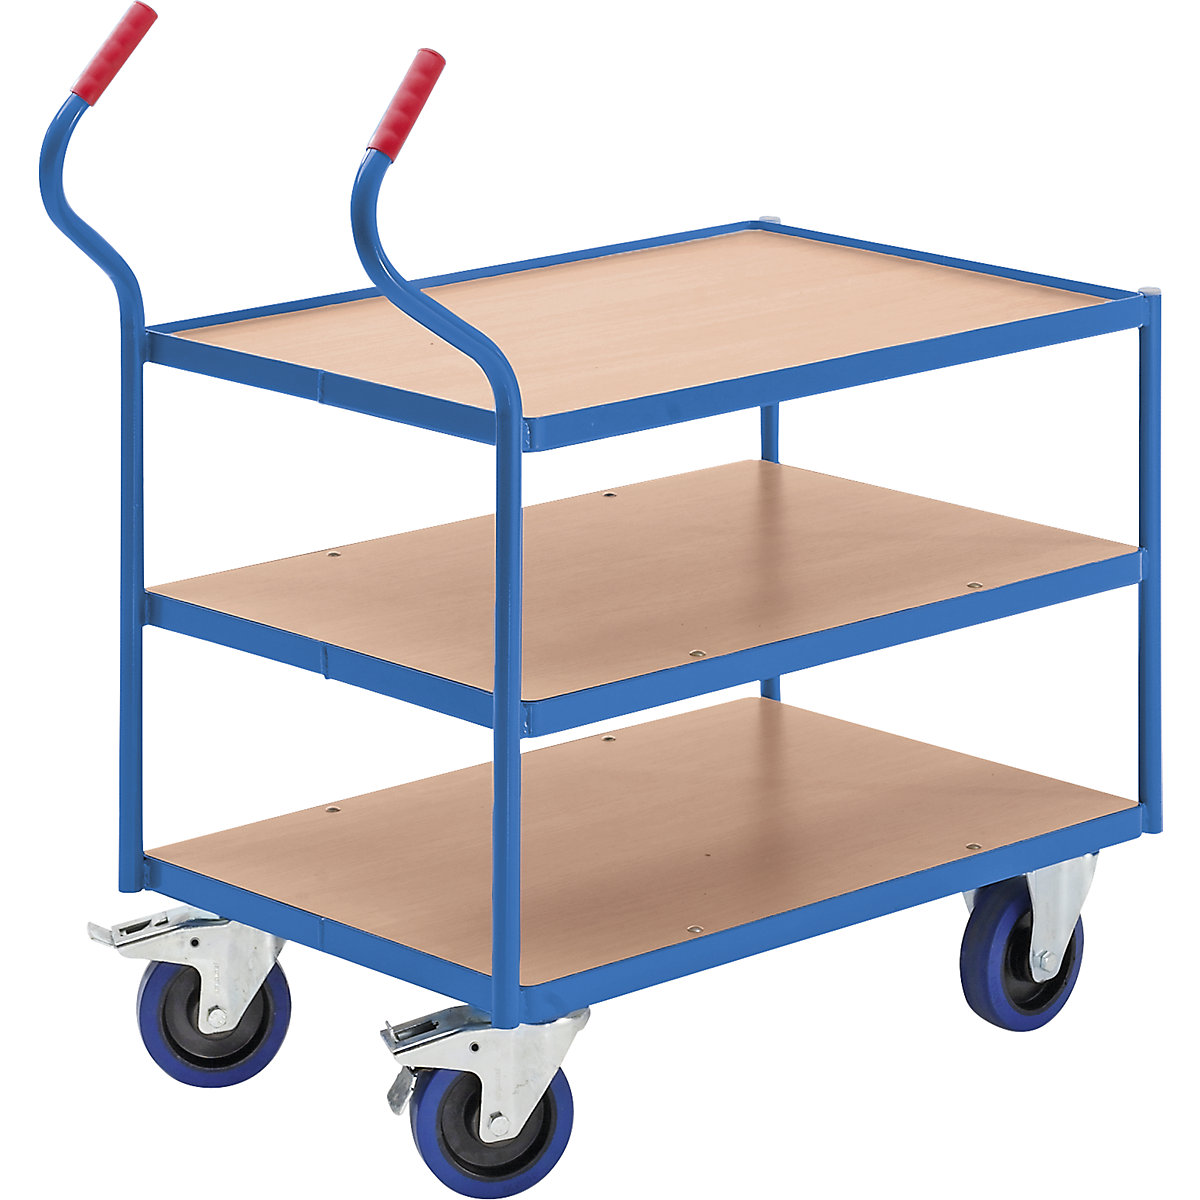 Industrial table trolley – eurokraft pro, fully elastic tyres, non-marking, shelf heights 235 / 500 / 765 mm-12